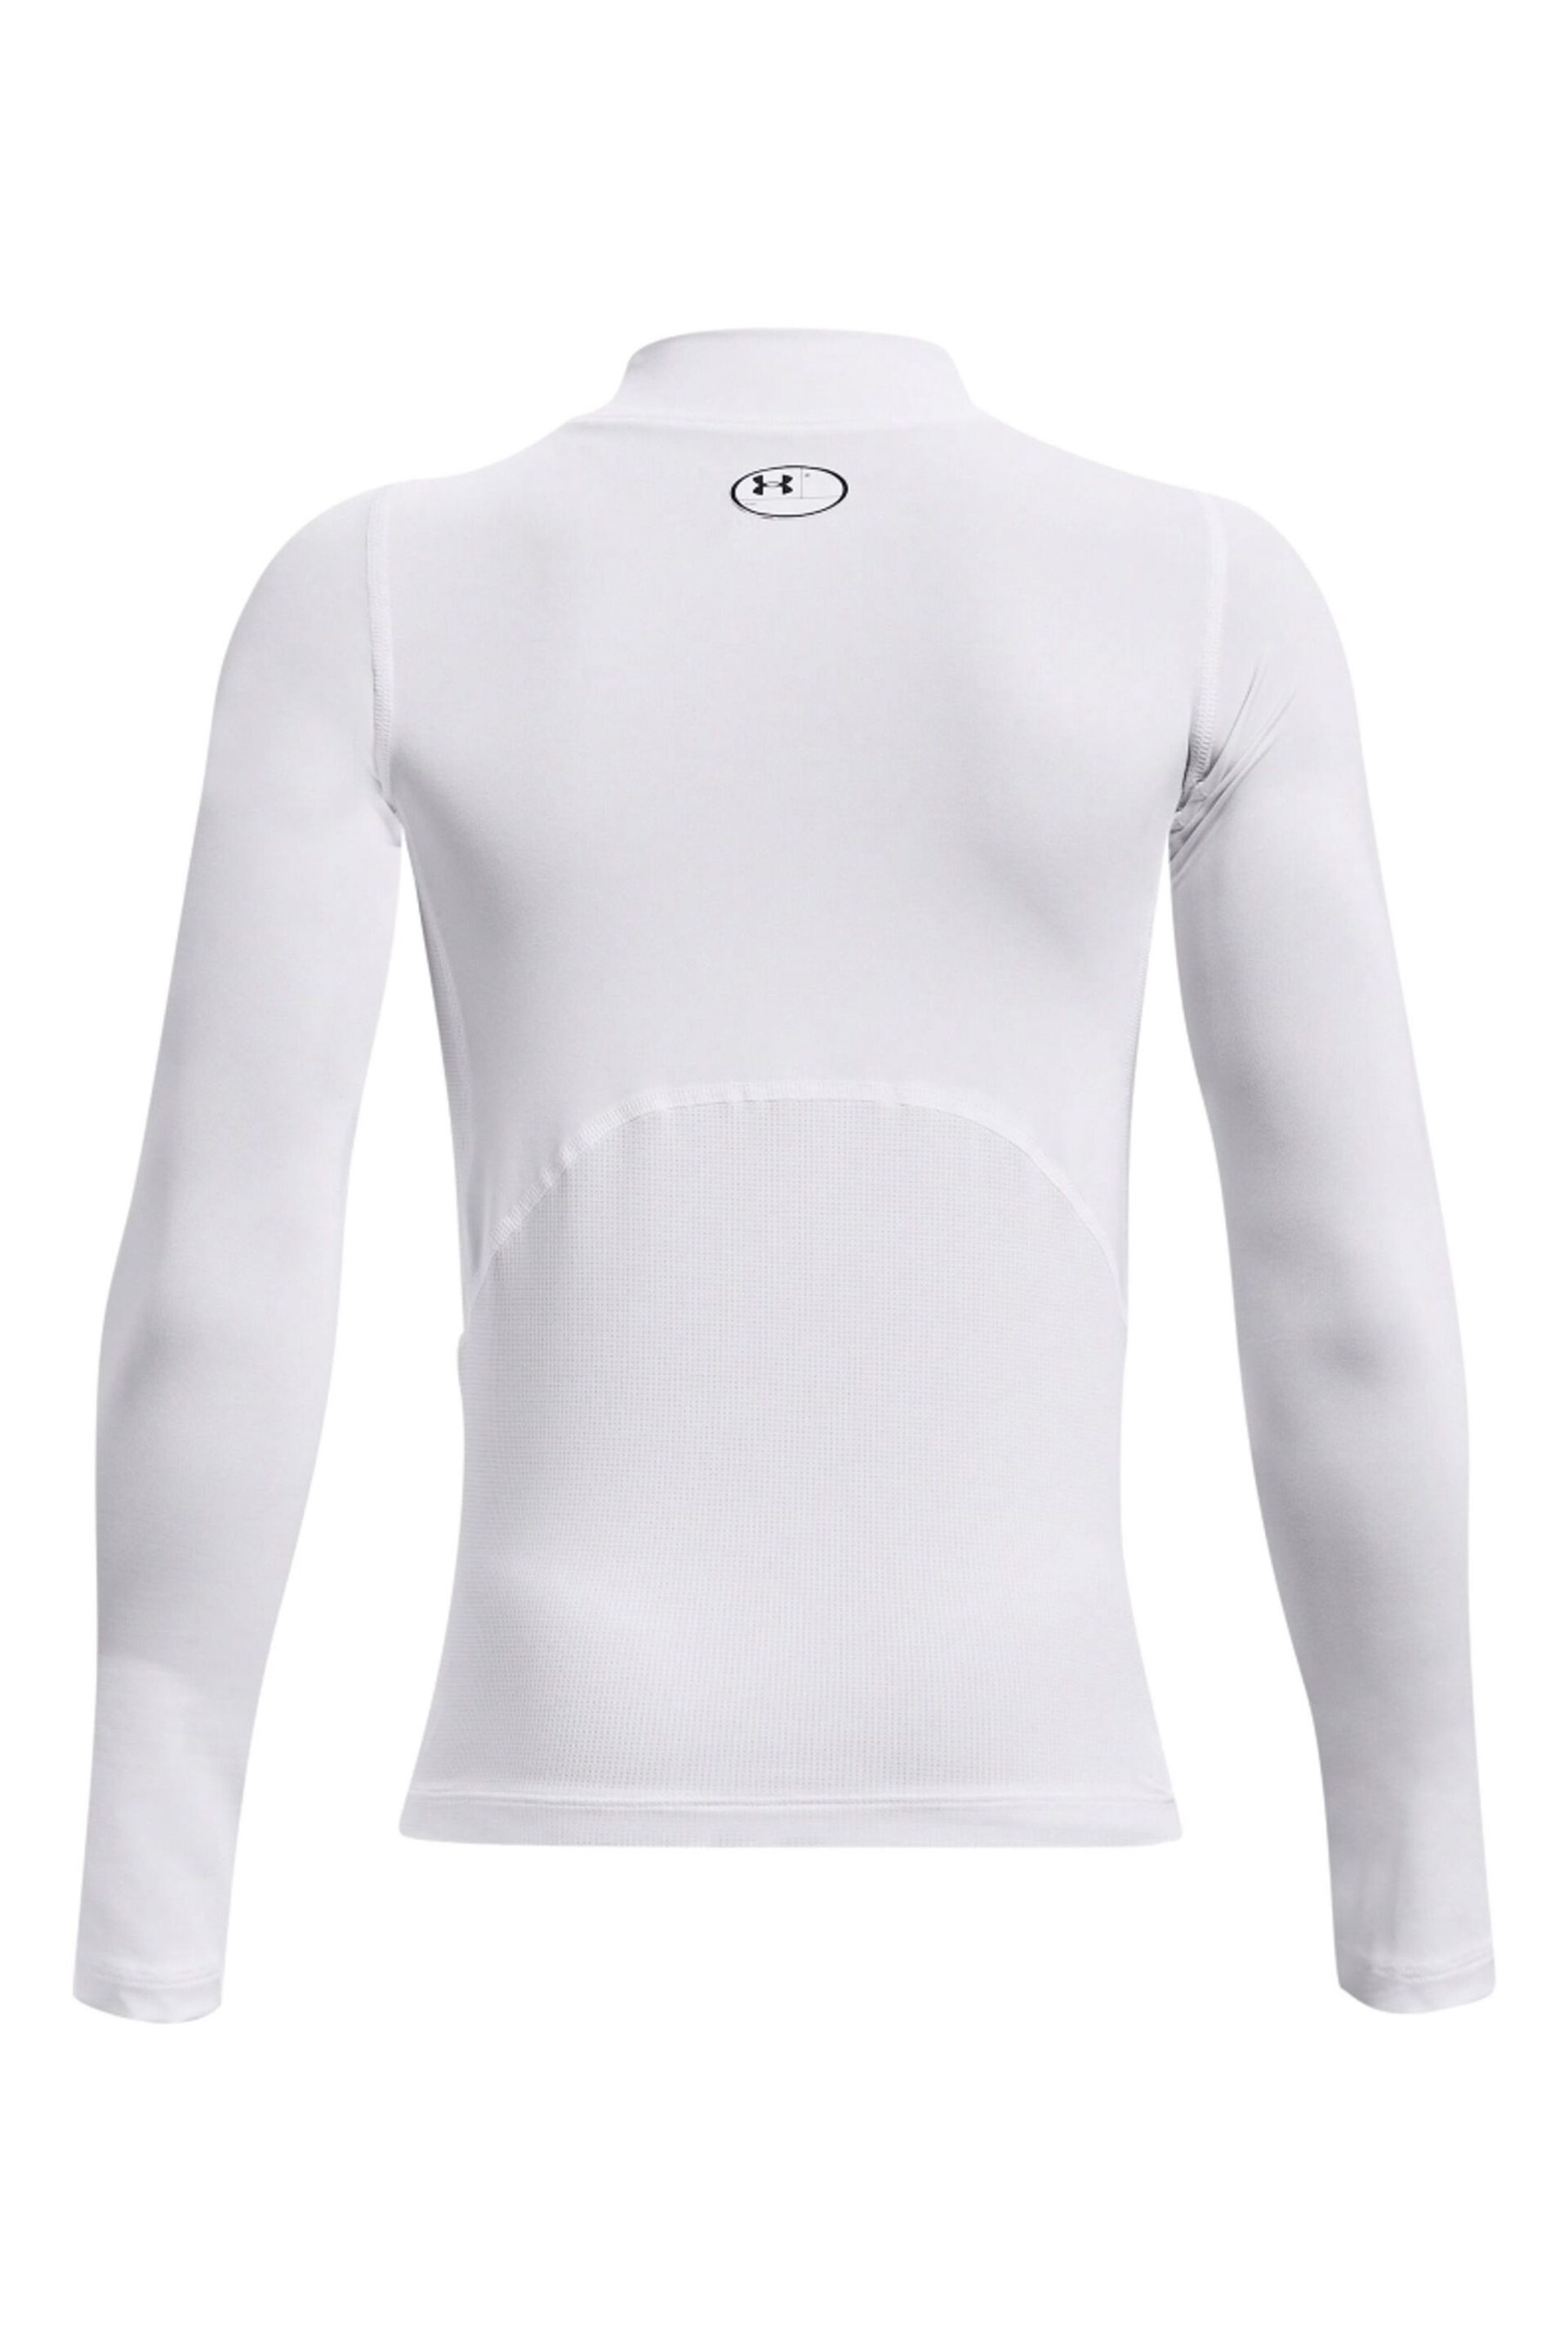 Under Armour White Youth HeatGear Armour Mock Long Sleeve T-Shirt - Image 2 of 2